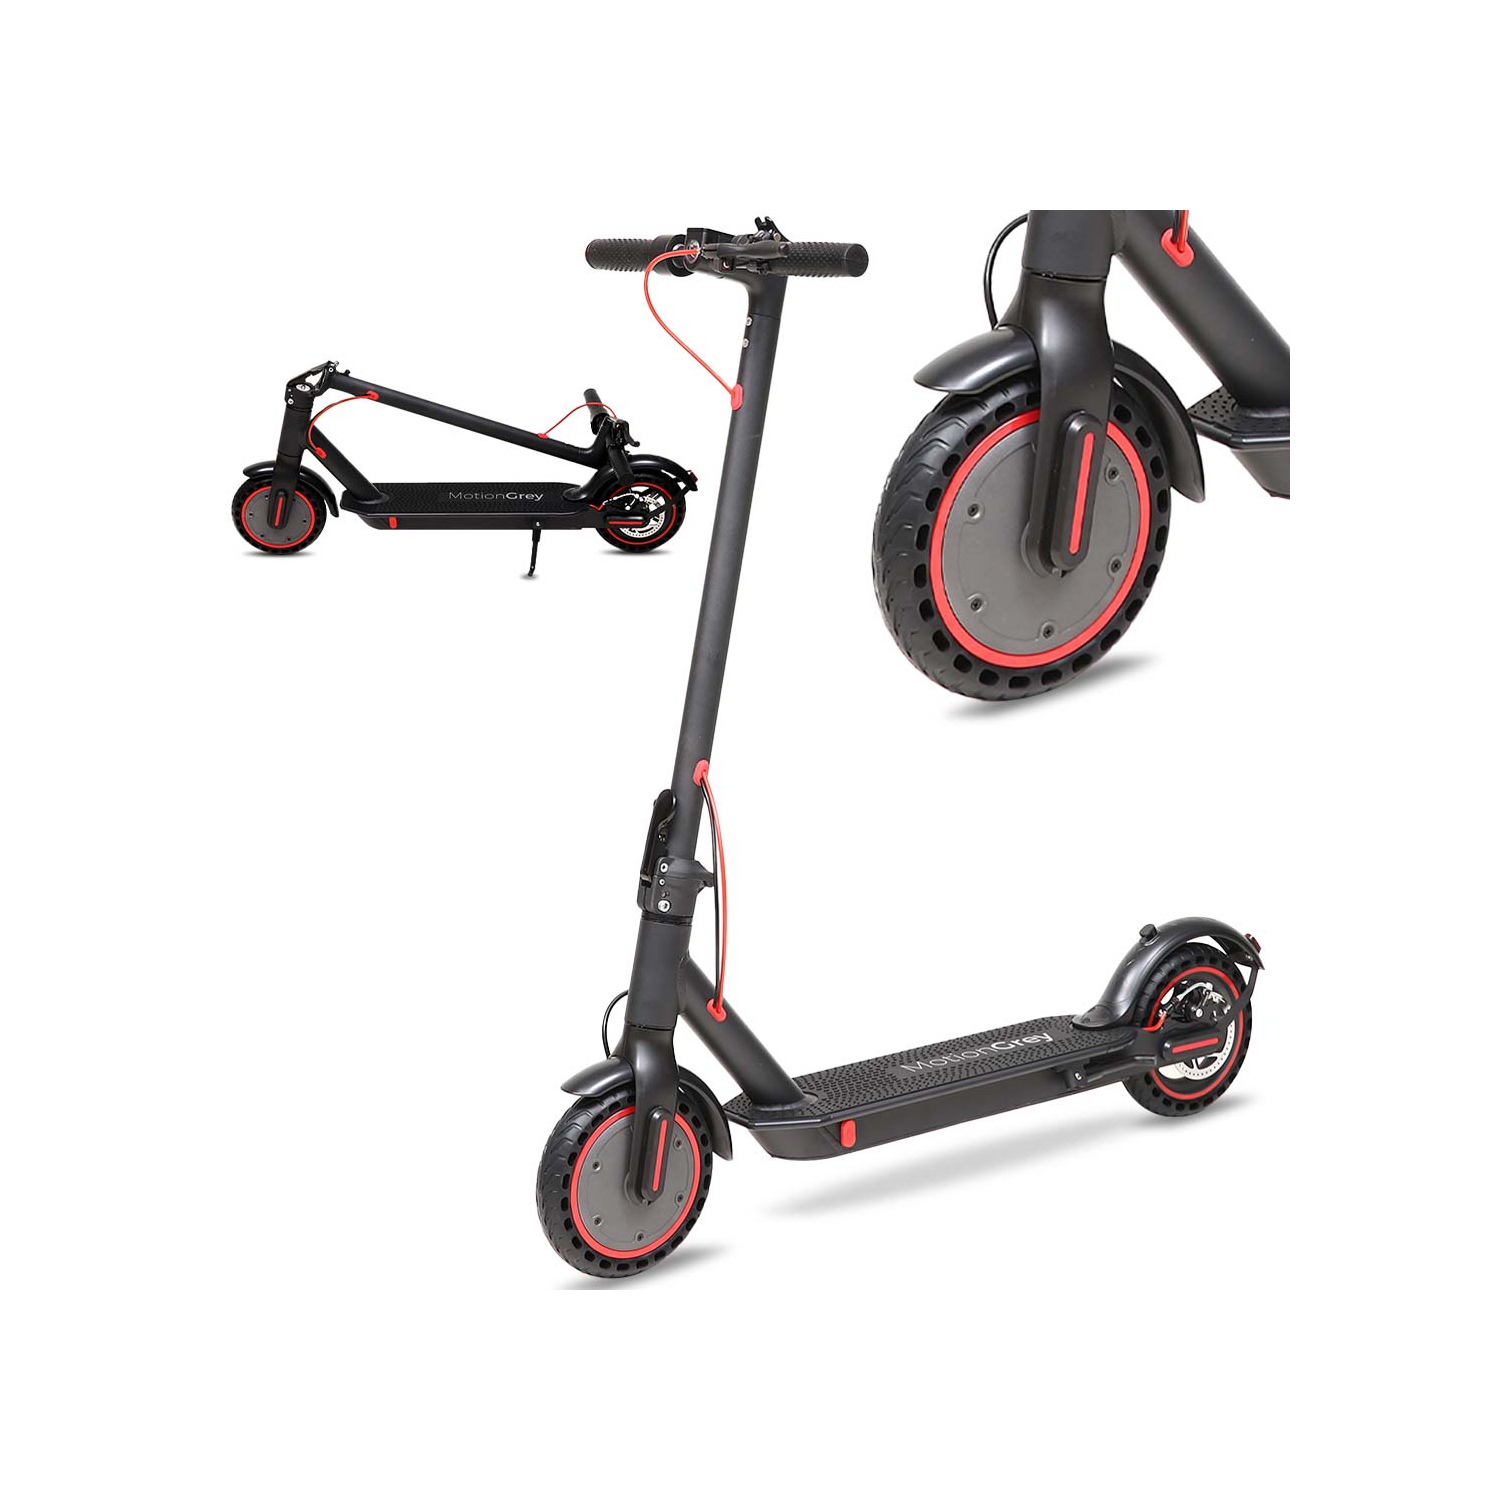 MotionGrey Portable Electric Scooter adults | 25km Range | 250W Motor | 8.5" Burst Proof Tires | 25 km/h Top Speed | Rear Fender | E Scooter for adults | Black